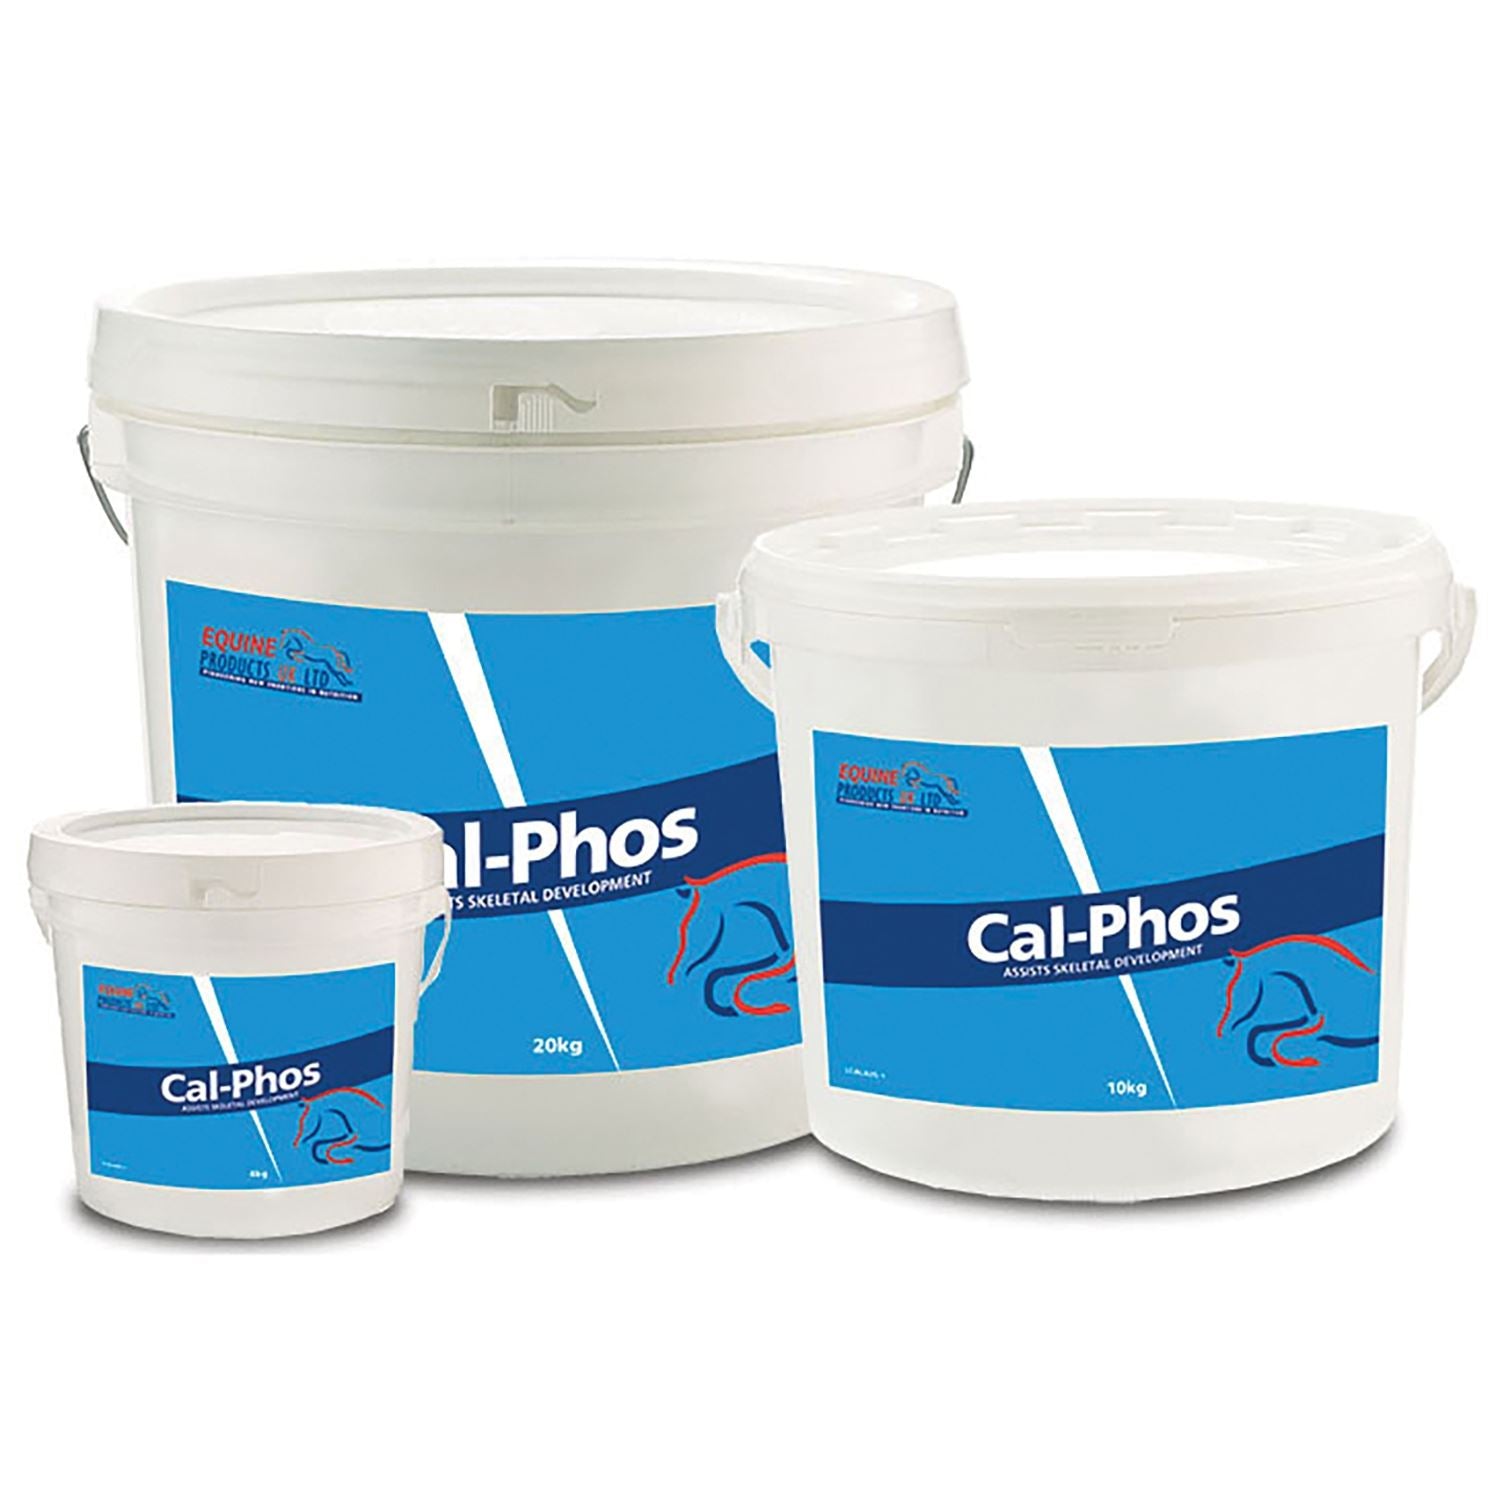 Equine Products Cal-Phos - Just Horse Riders